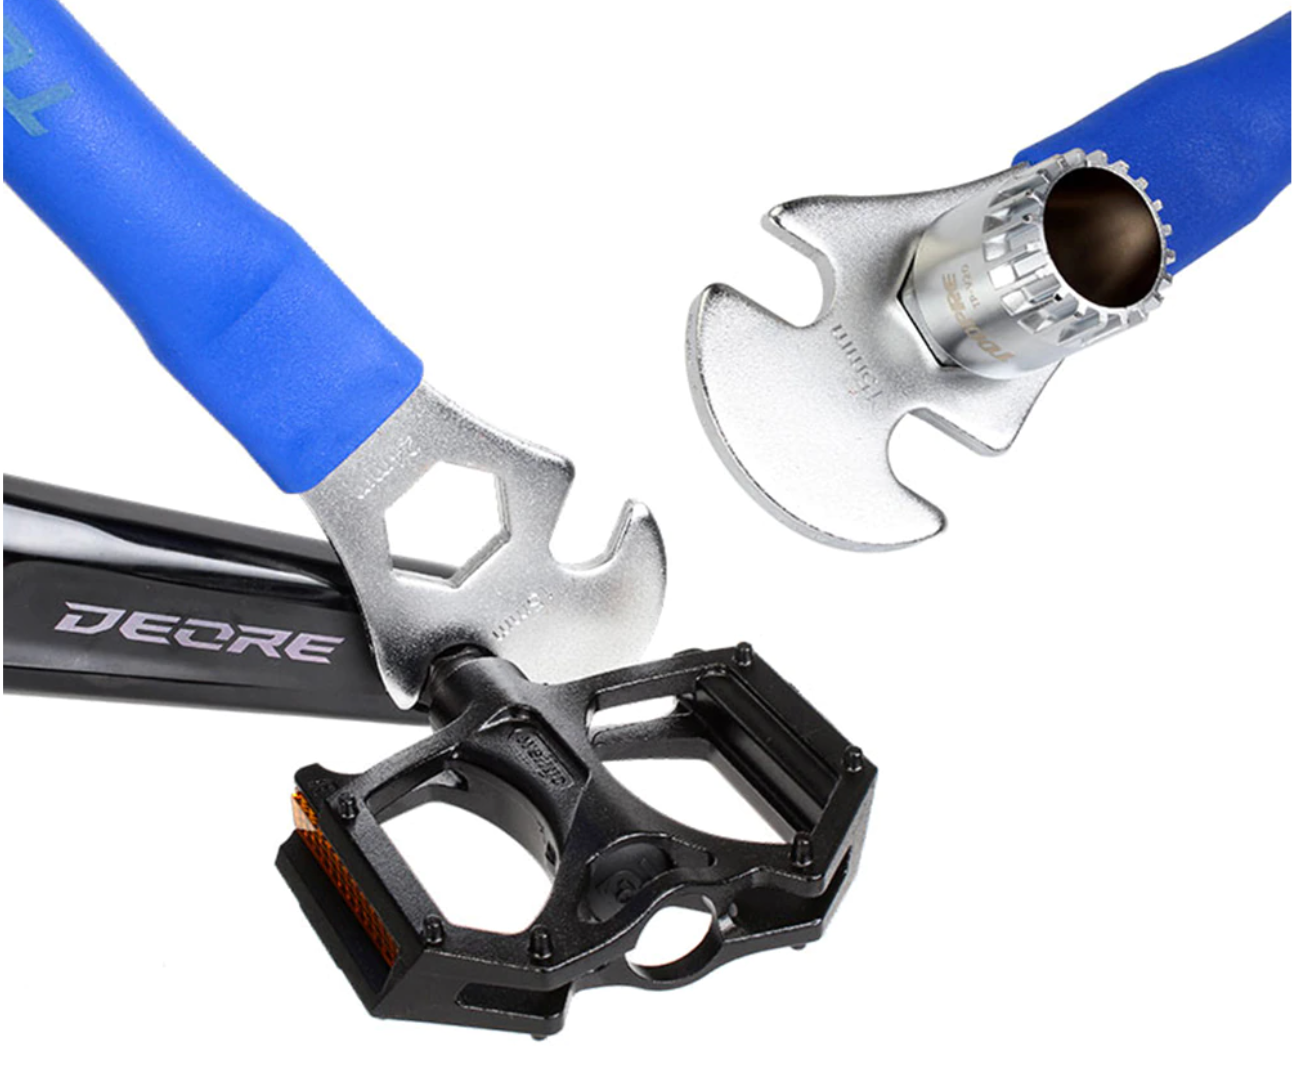 Toopre Pedal Removal Wrench